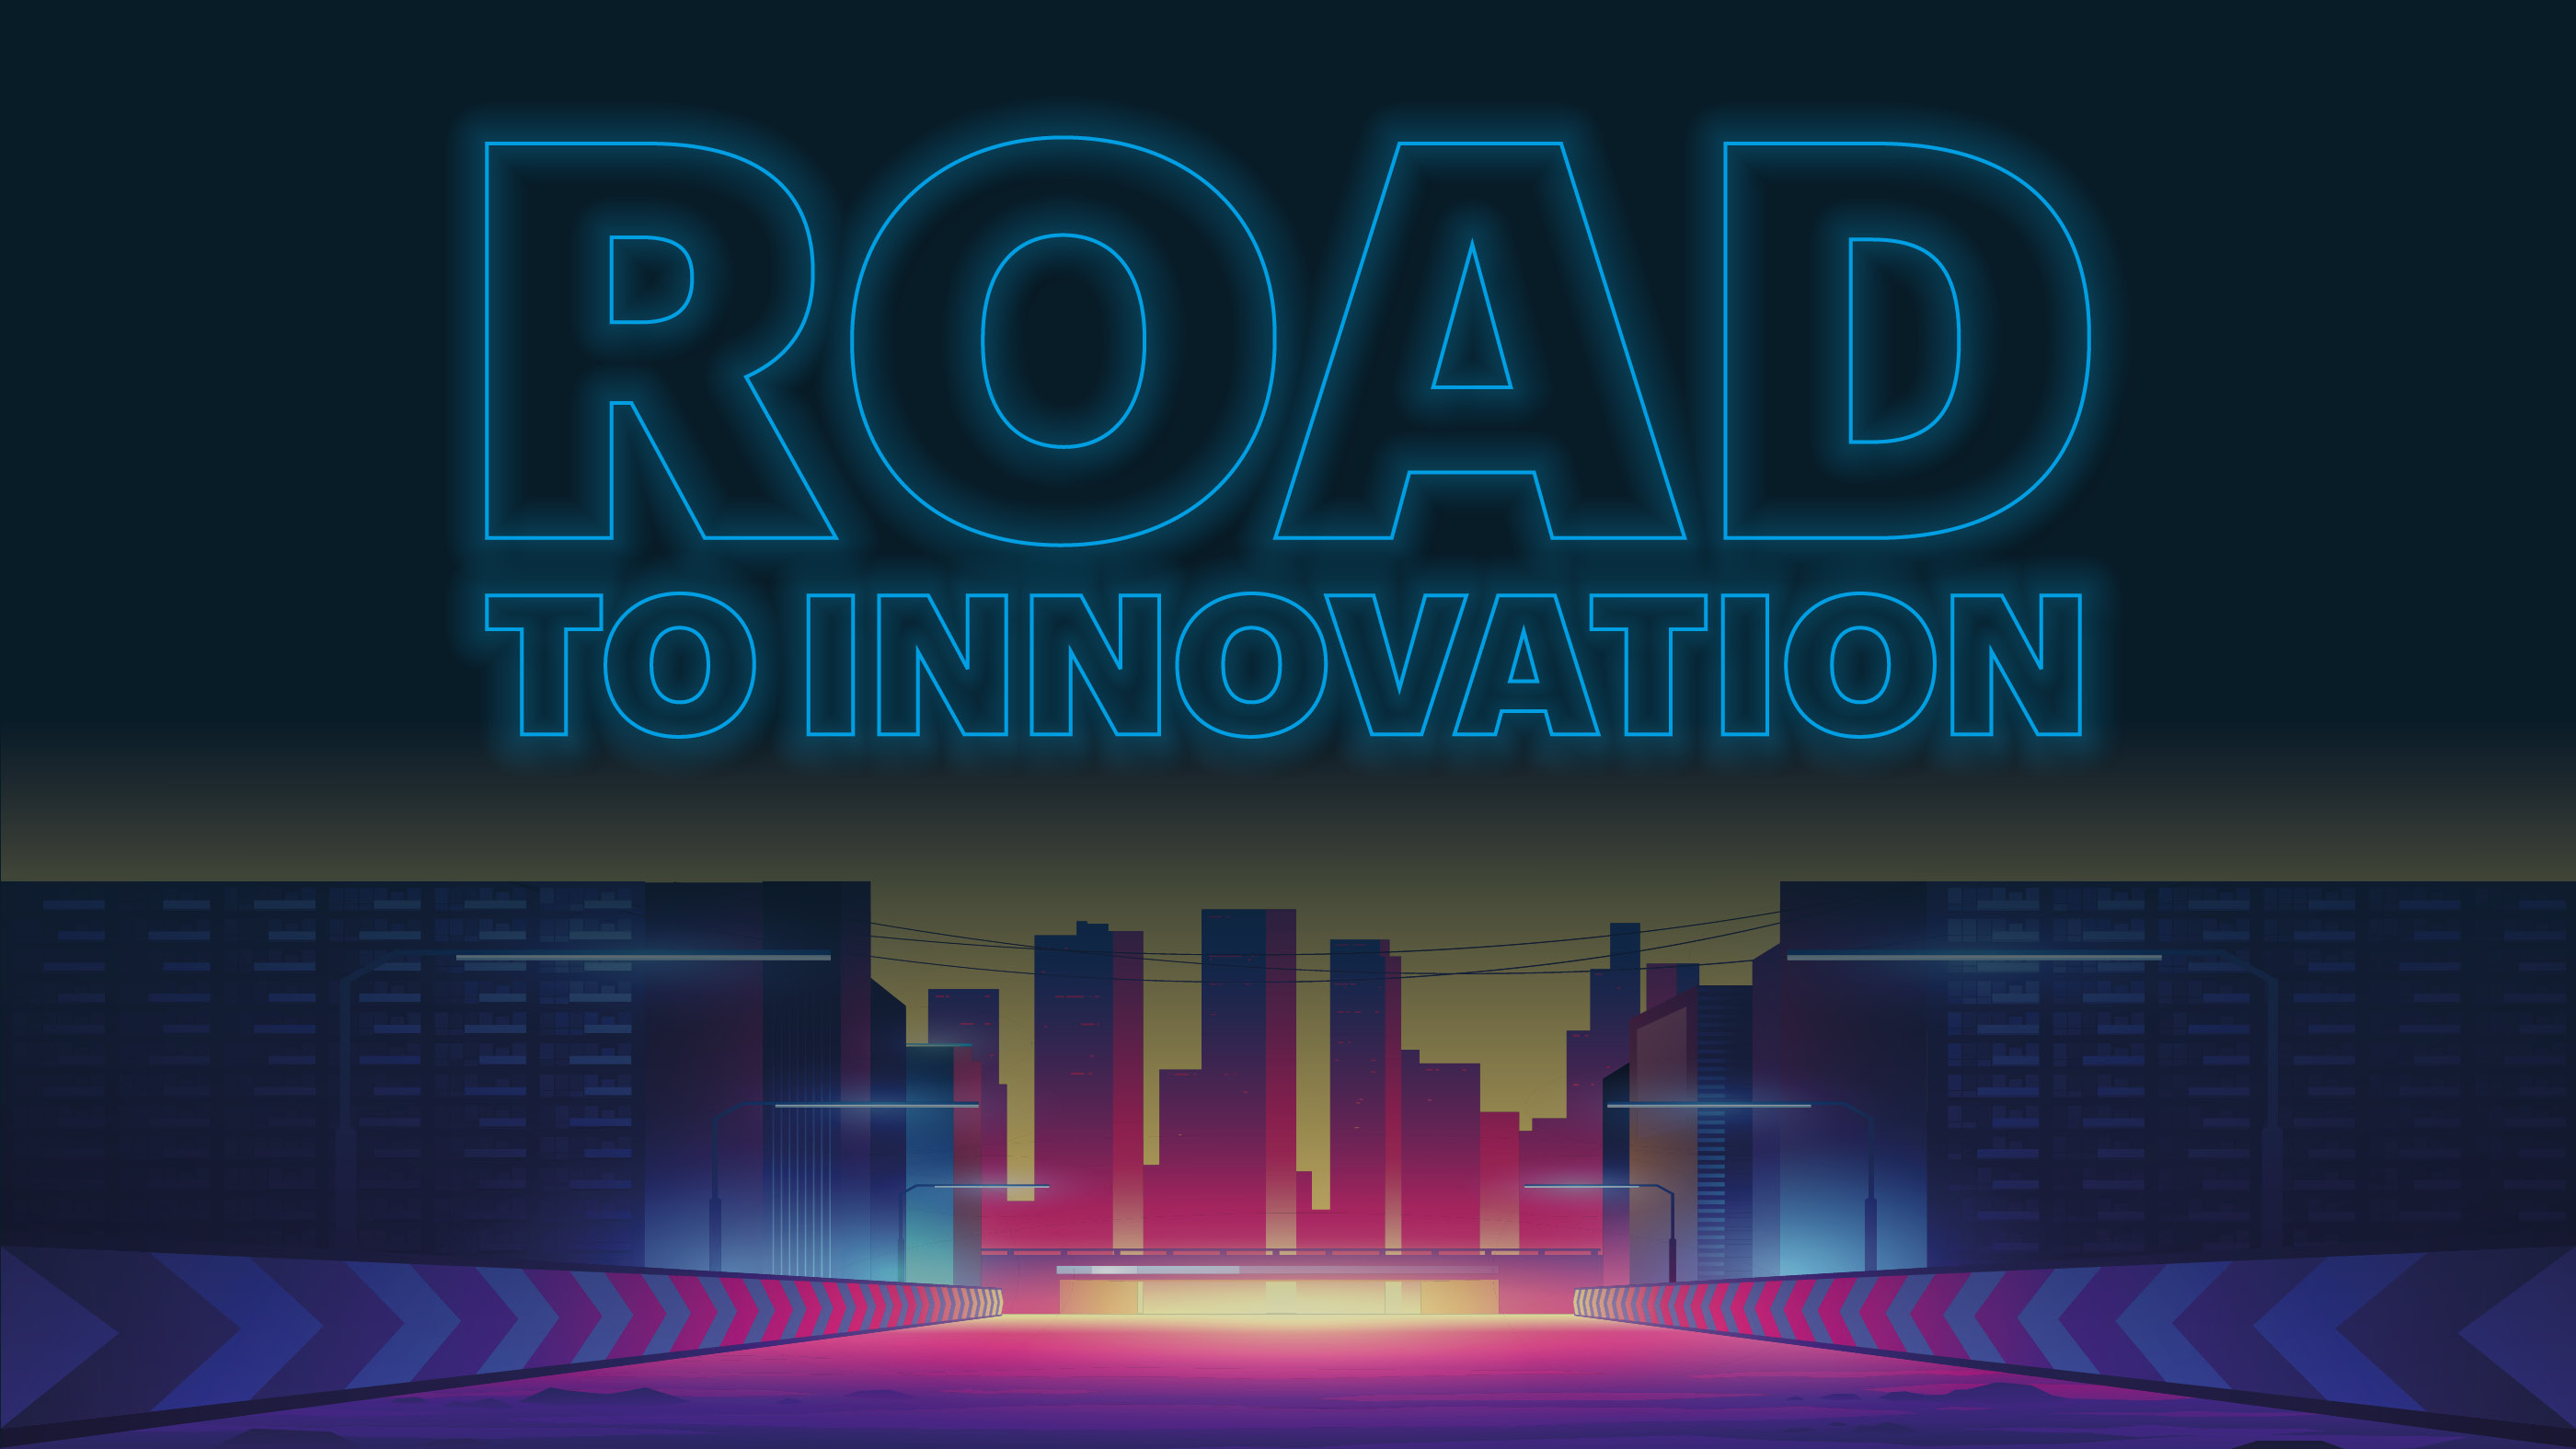 Road to innovation 